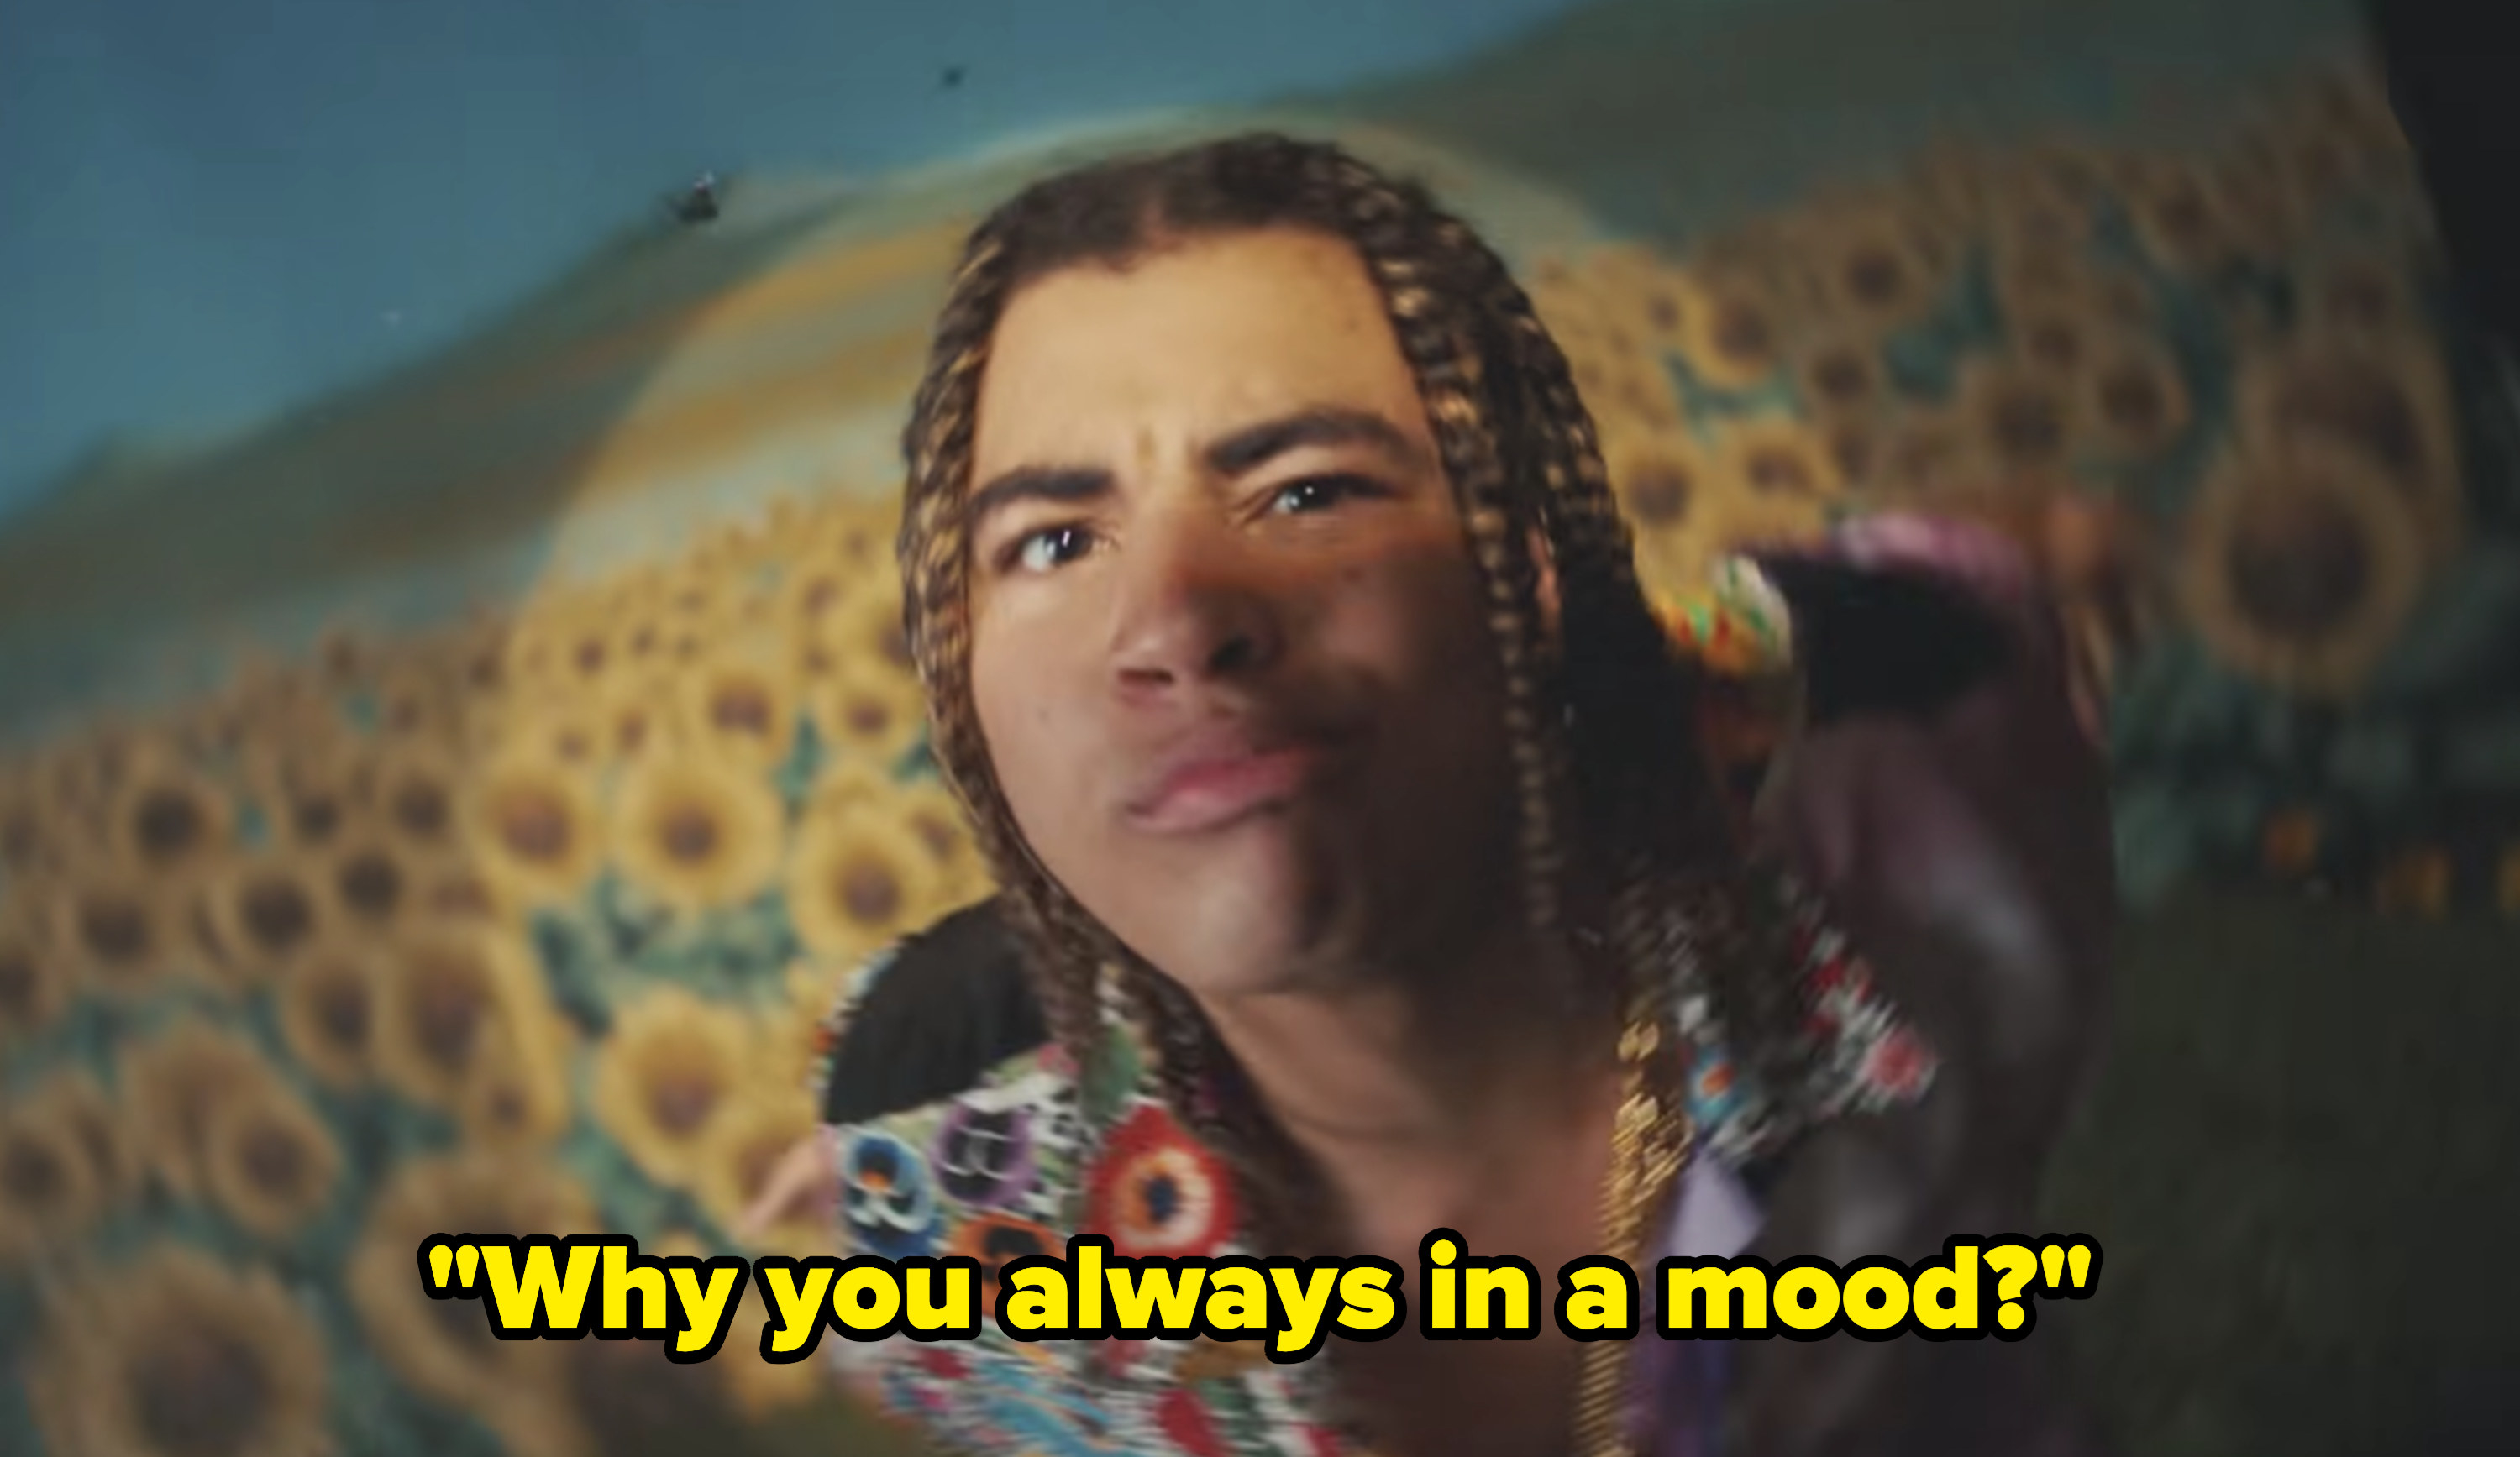 24kGoldn sings &quot;Why you always in a mood?&quot;